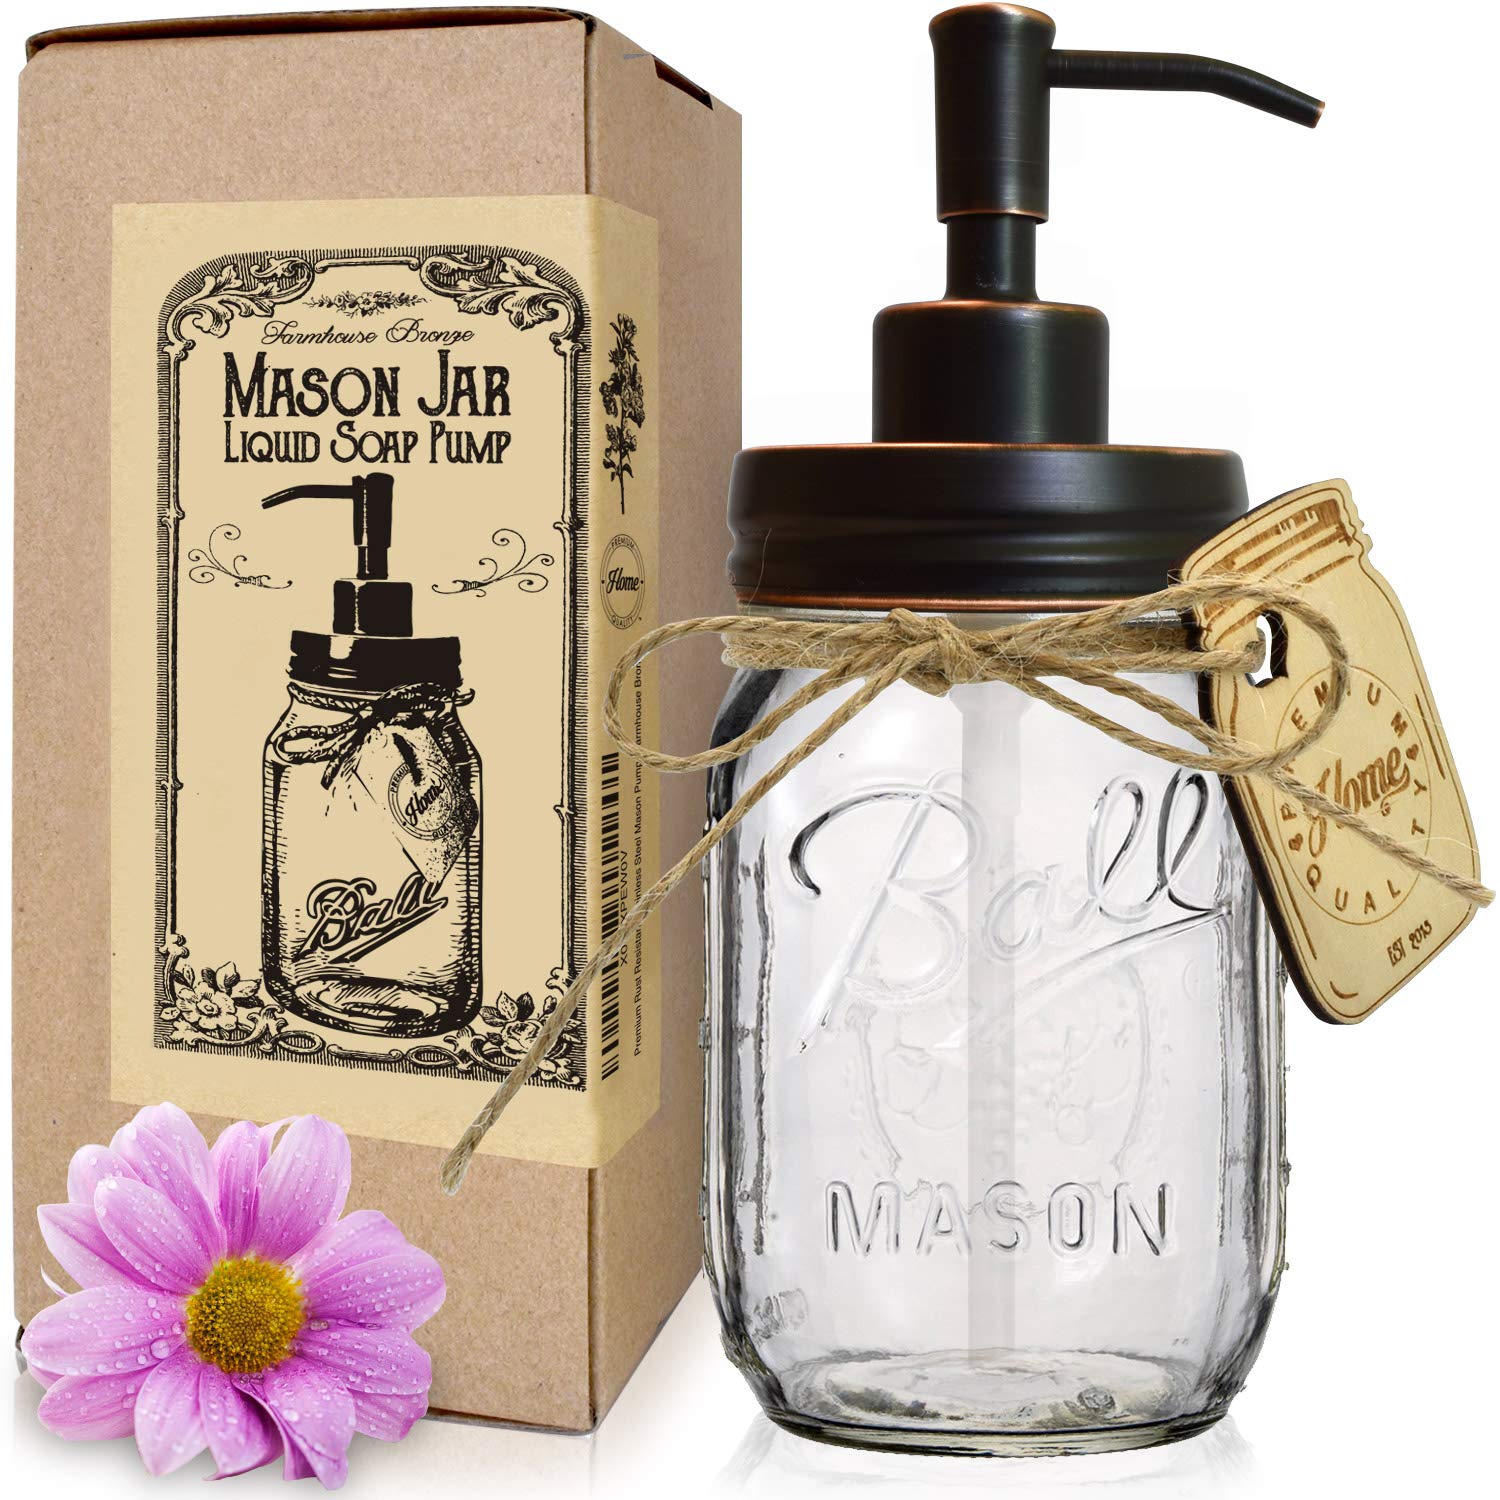 Book Cover Bronze Mason Jar Soap Dispenser - Stainless Steel Pump for Liquid Dish, Hand Soap or Lotions - Vintage Ball 16 oz Glass Mason Jar for Kitchen or Bathroom (Farmhouse Style Pump, Oil Rubbed Bronze) 1 Farmhouse Oil Rubbed Bronze